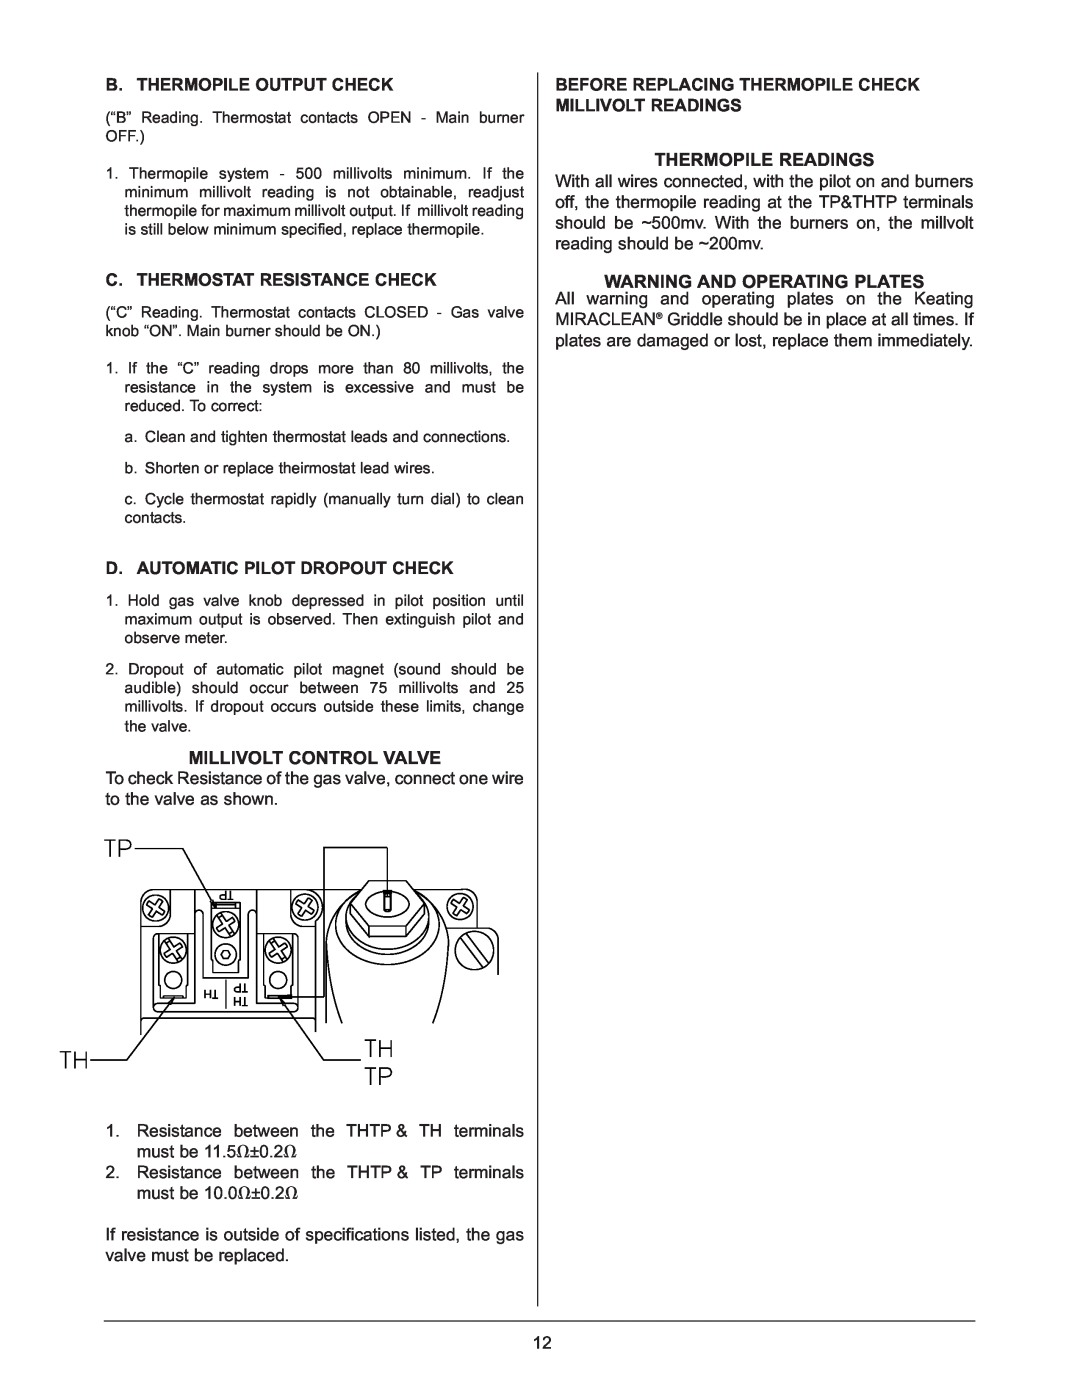 Keating Of Chicago 37399 user manual Millivolt Control Valve, Thermopile Readings, Warning And Operating Plates 